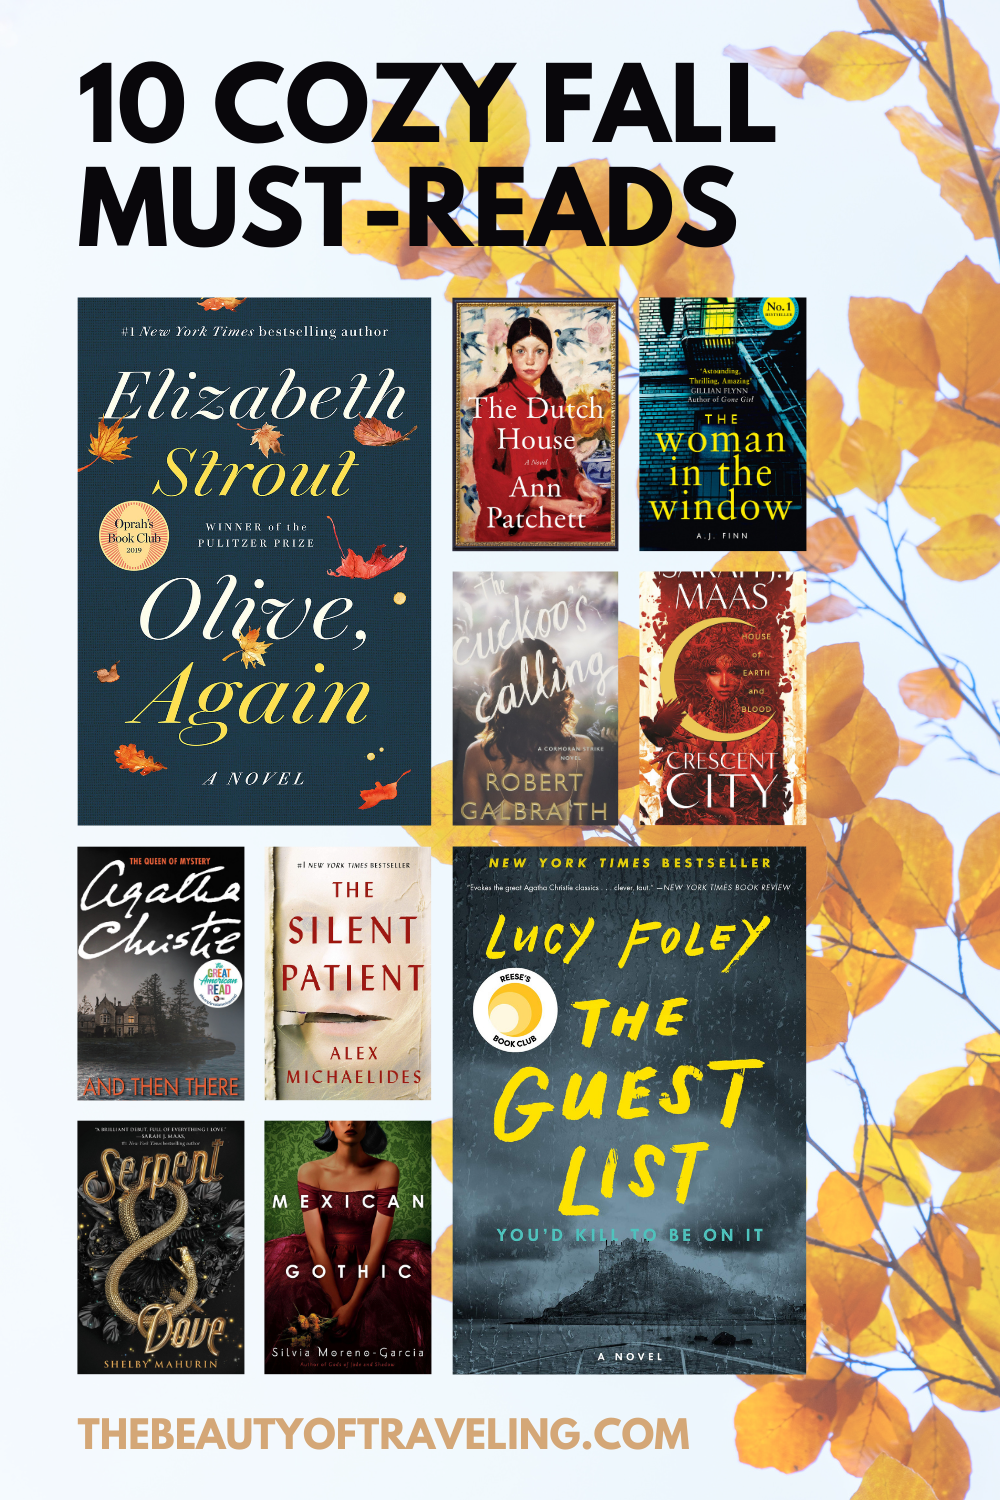 10 Cozy Fall Books - the beauty of traveling 